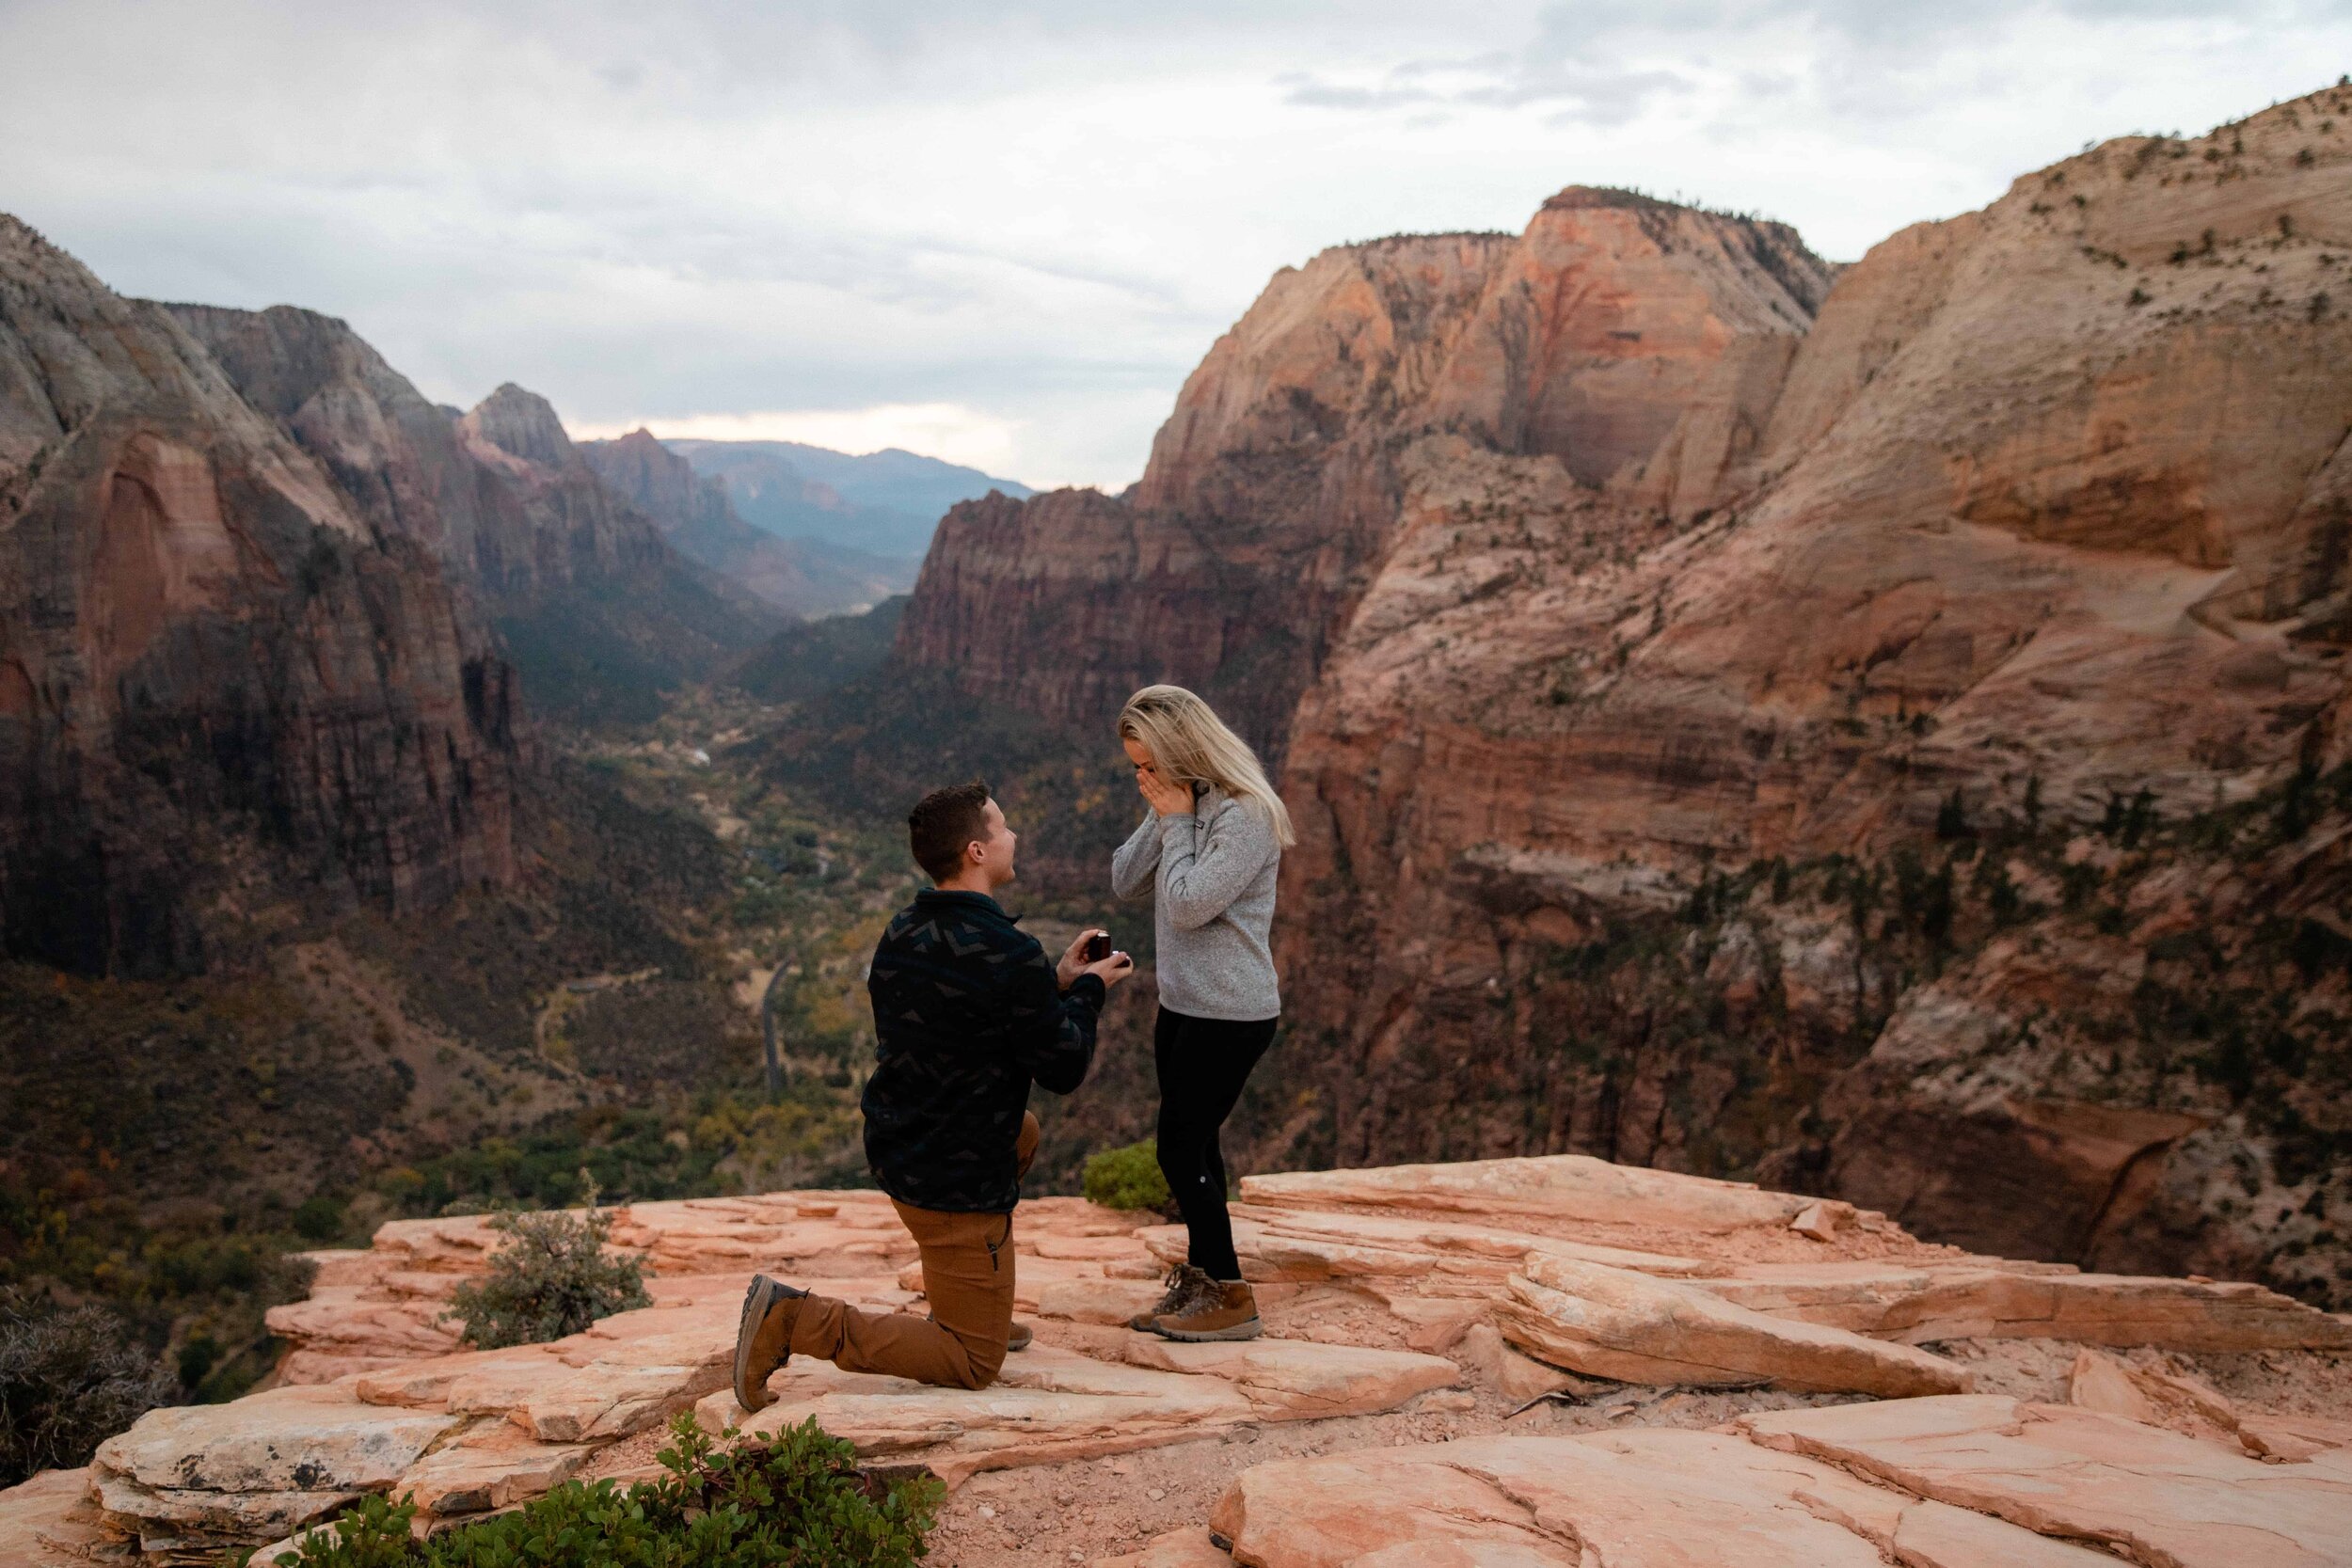 Proposal Photos in Zion National Park, UT